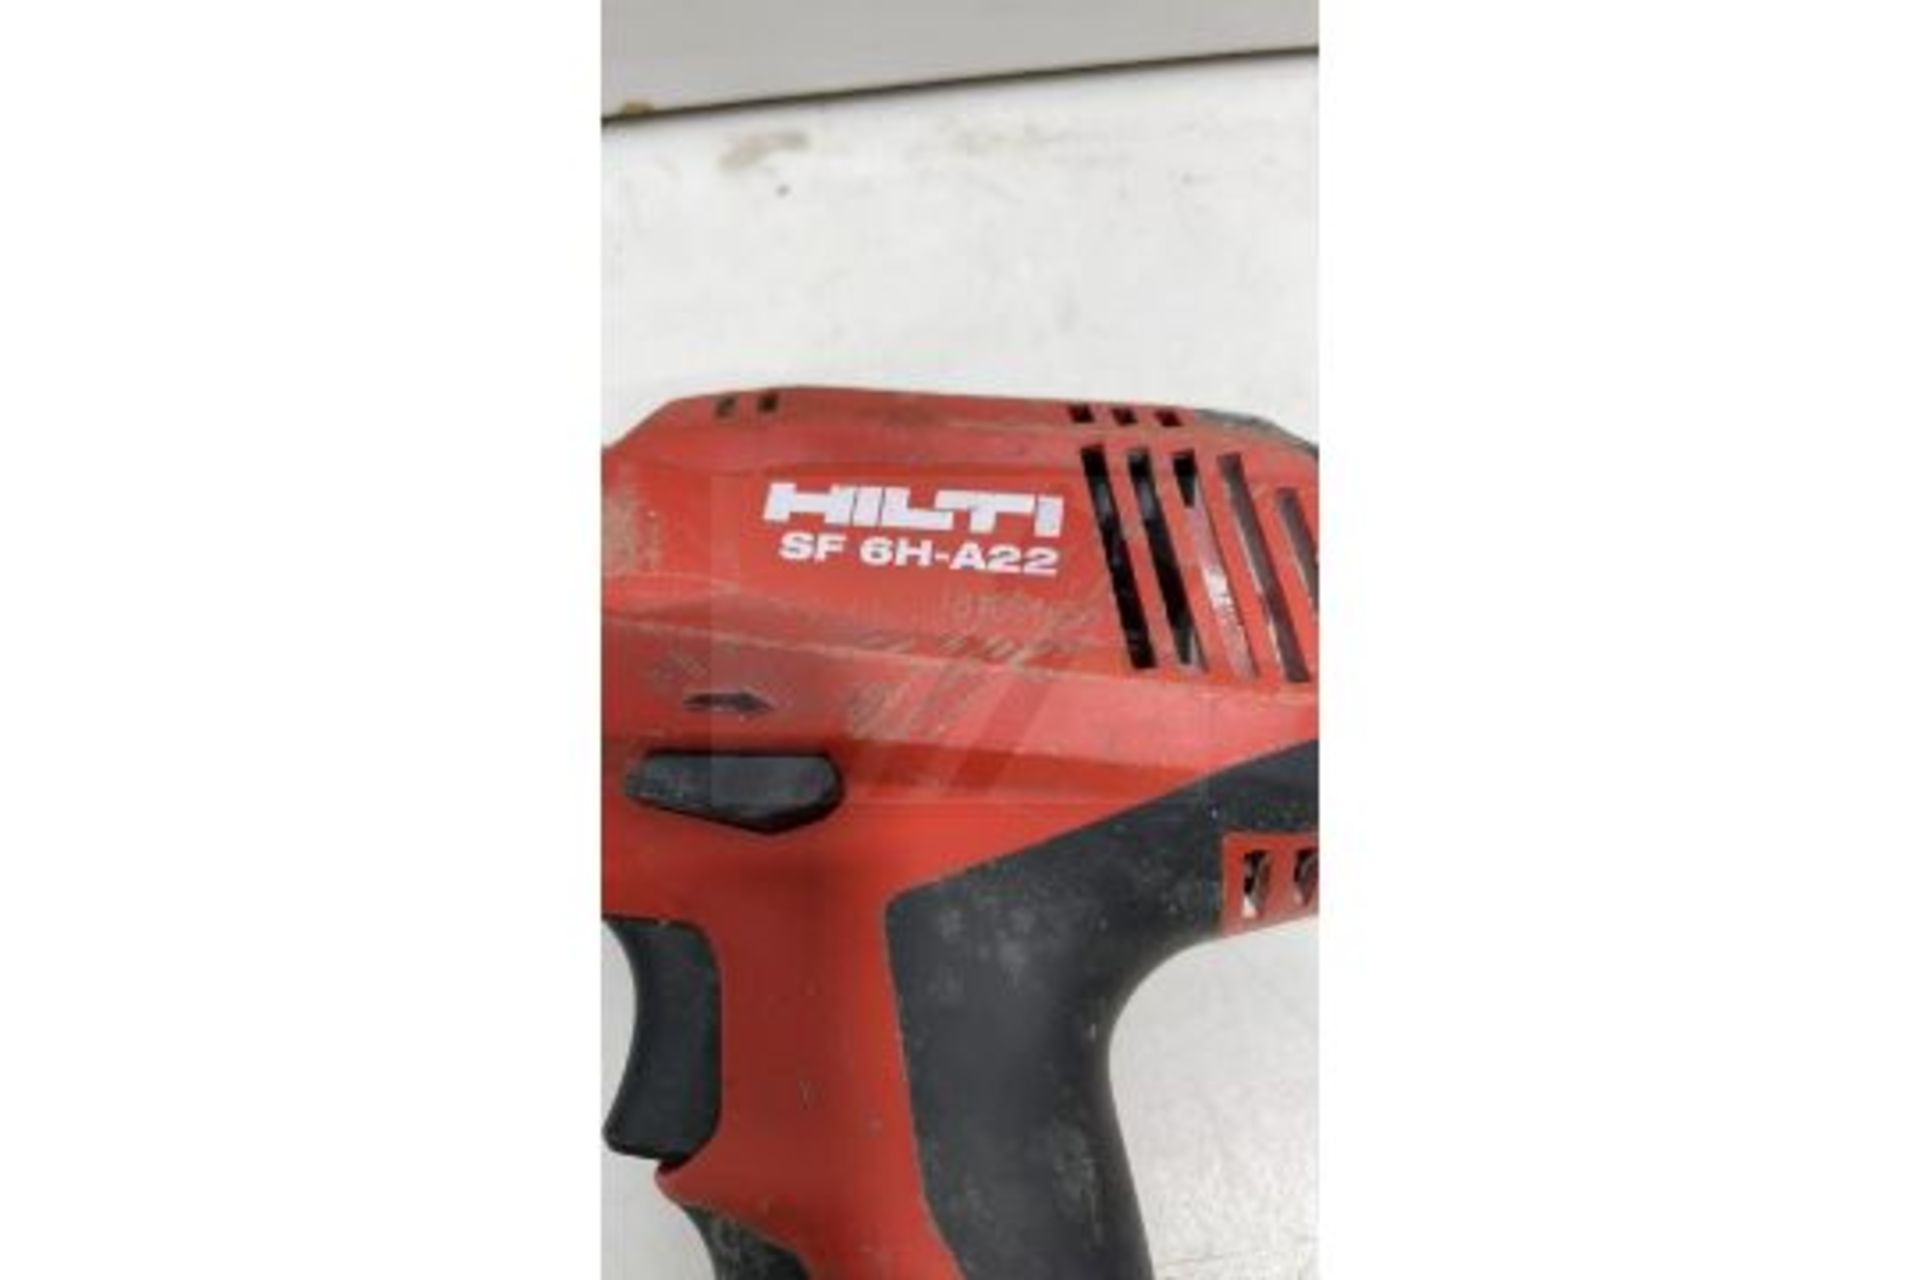 HILTI 6H-A22 Cordless hammer drill driver | NO BATTERY - Image 4 of 8